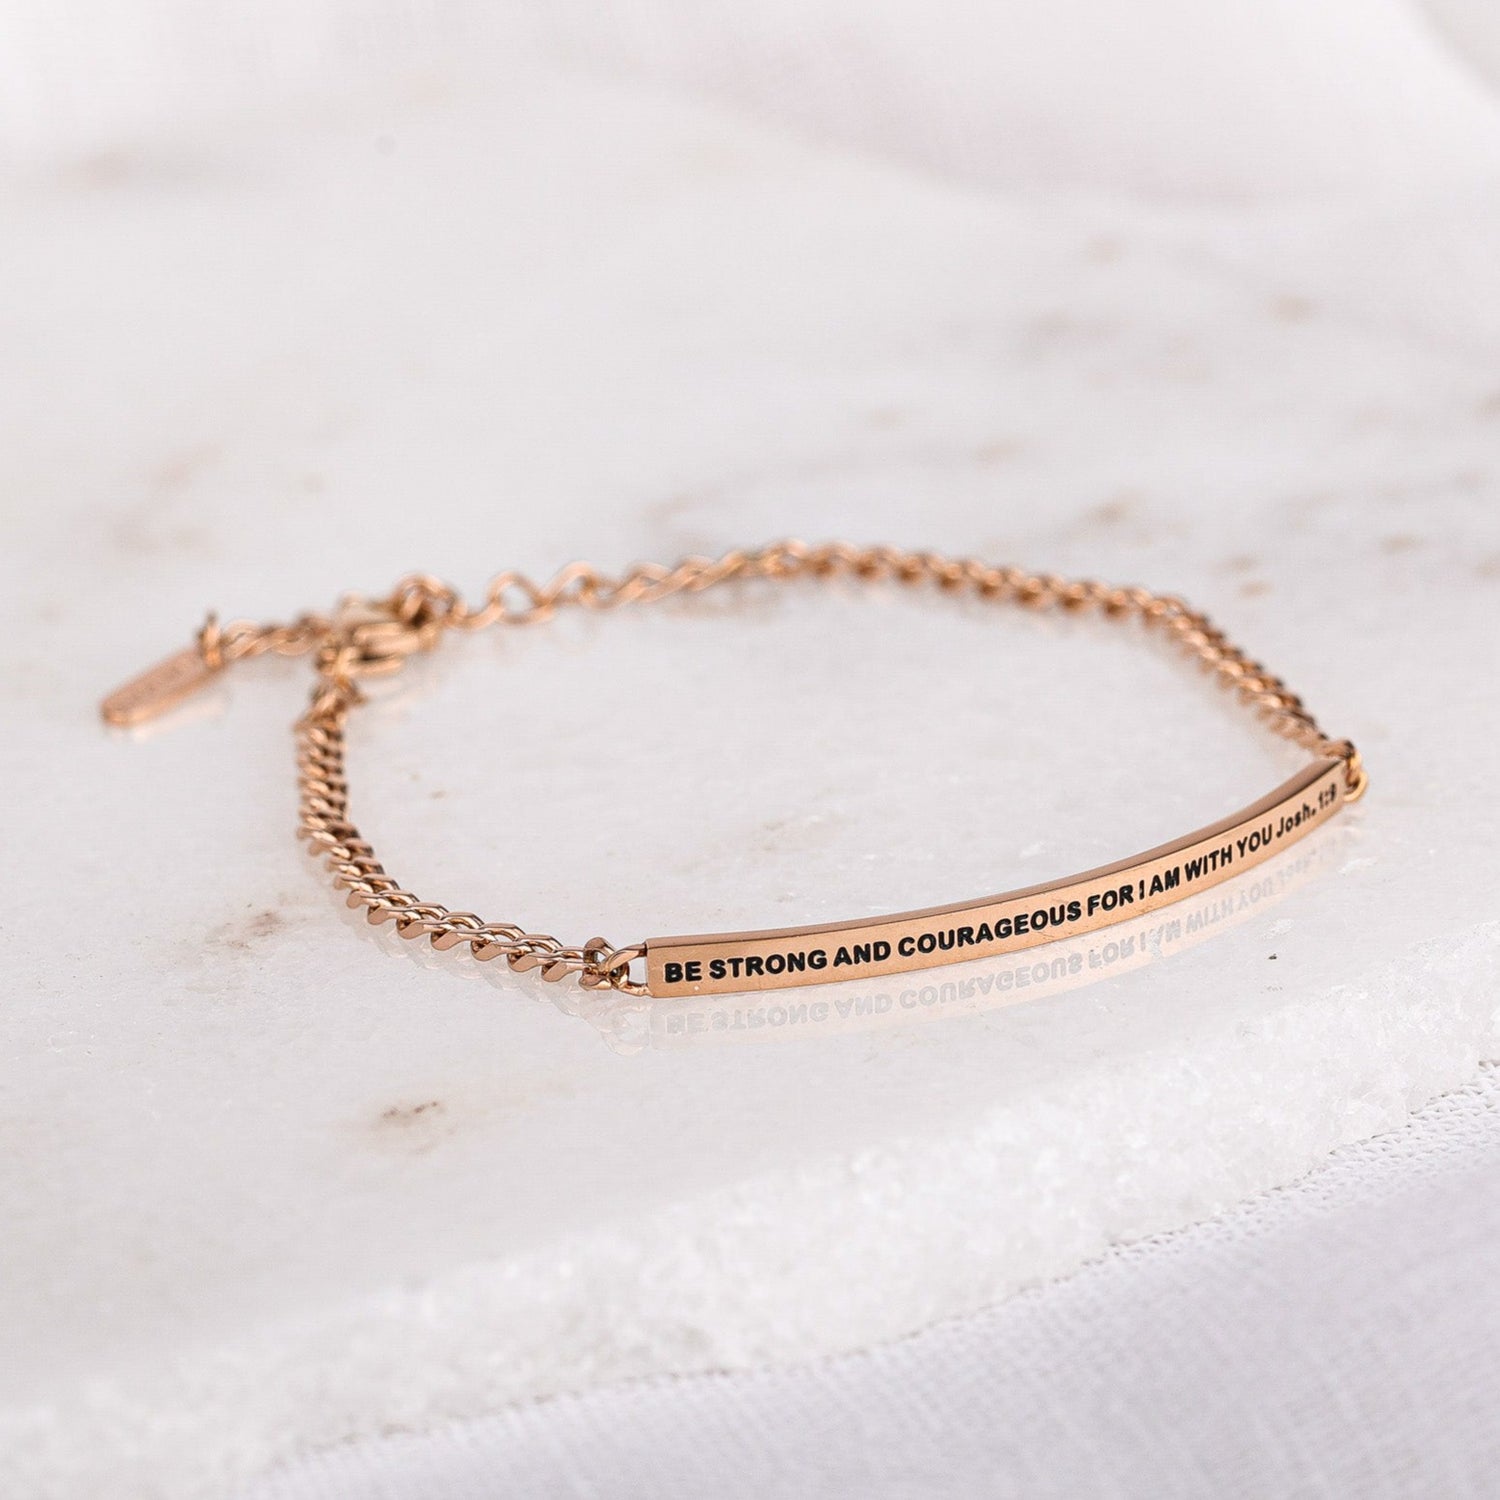 BE STRONG AND COURAGOUS FOR I AM WITH YOU- DAINTY CHAIN BRACELET - Inspiration Co.